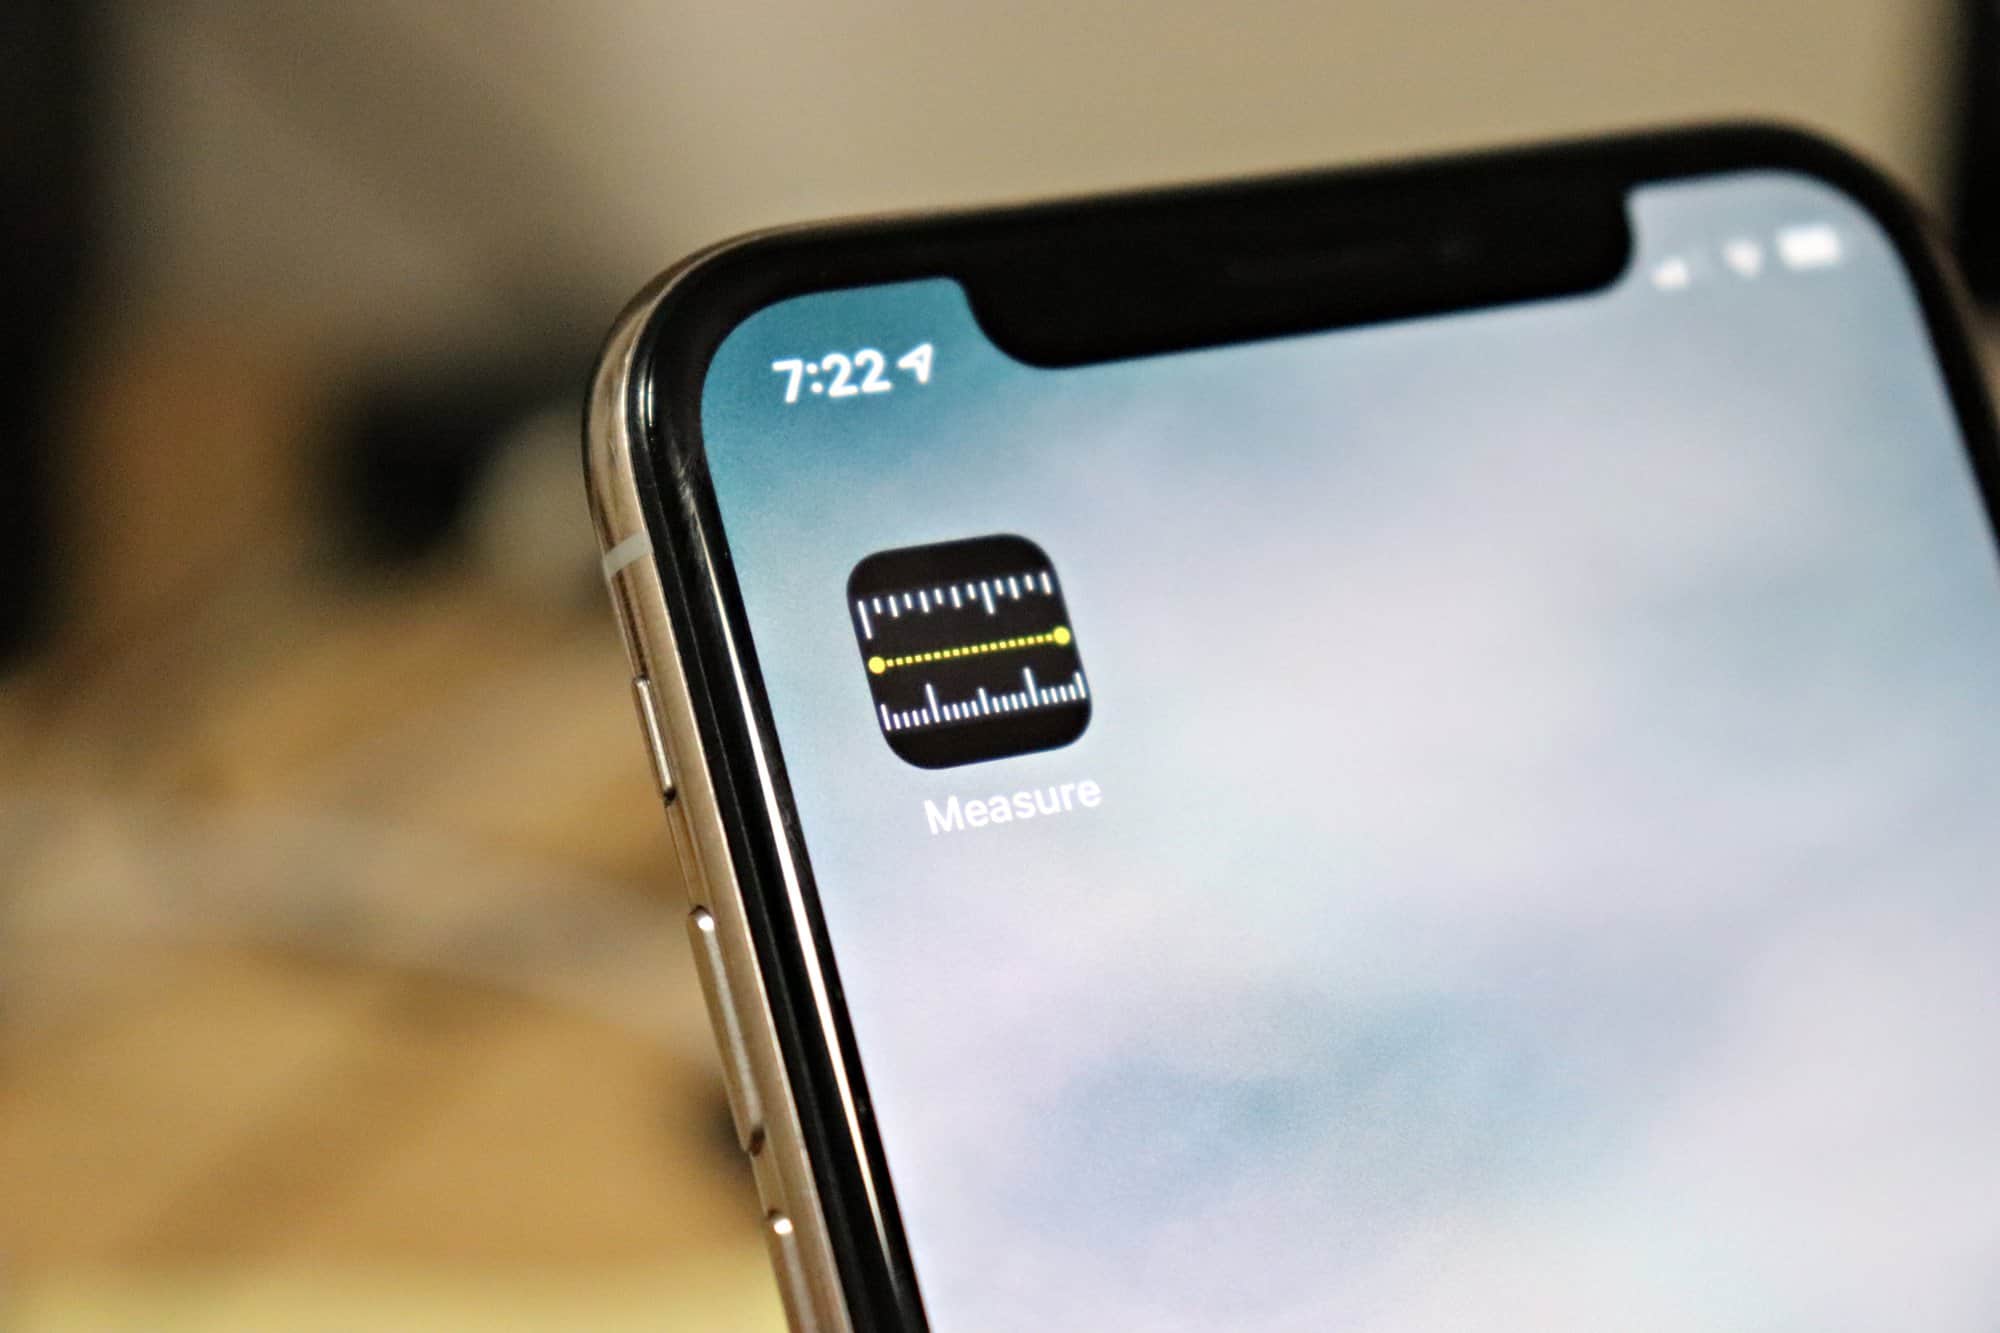 iOS 12 Measure app not working? You might be using it wrong